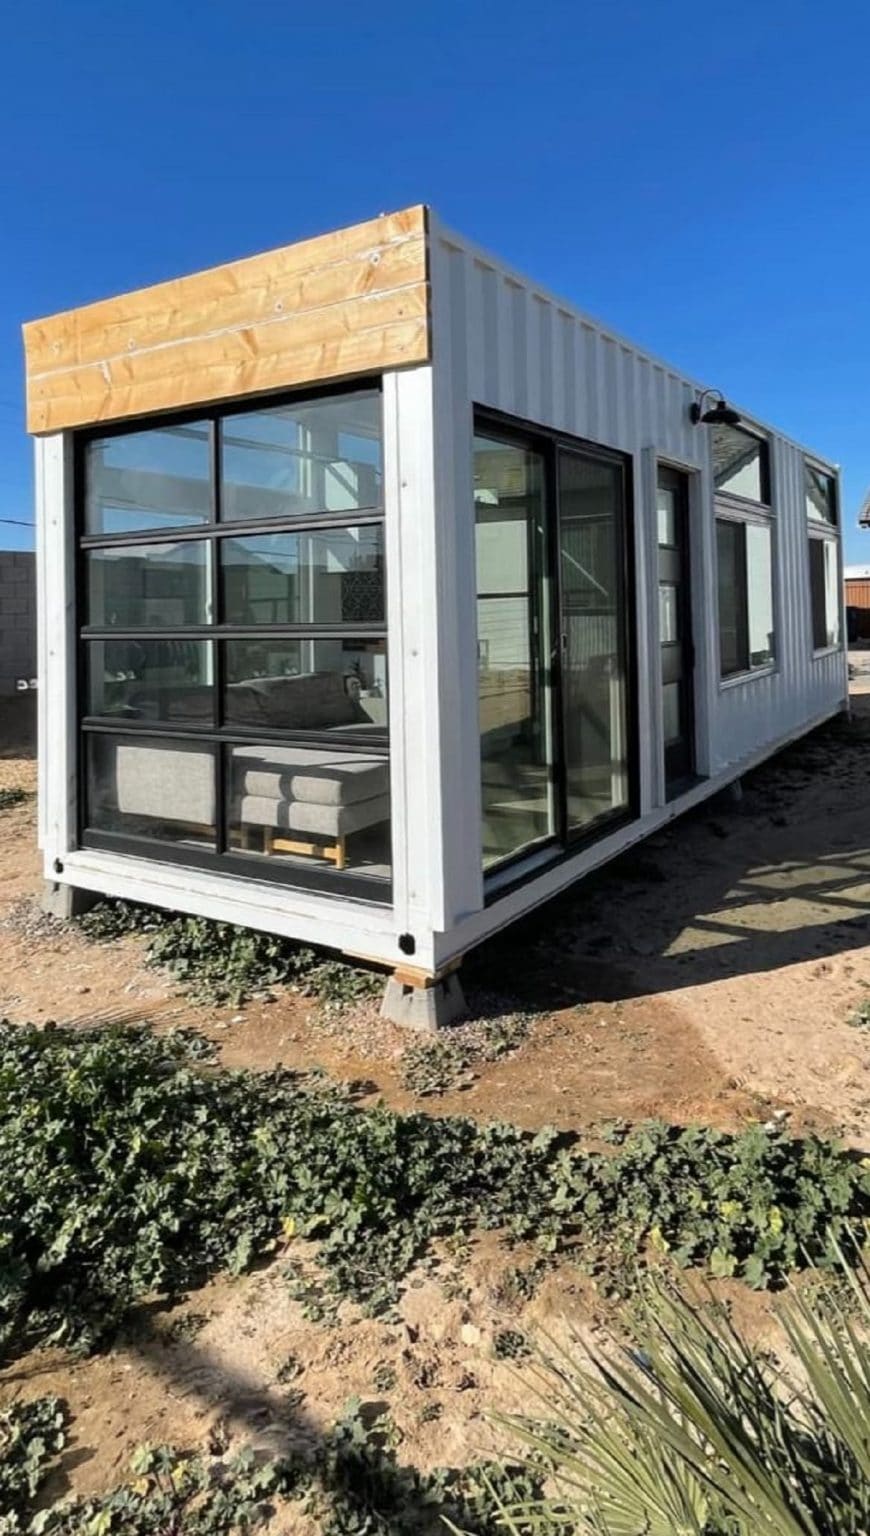 16 Awesome Tiny Container Homes - Tiny Houses